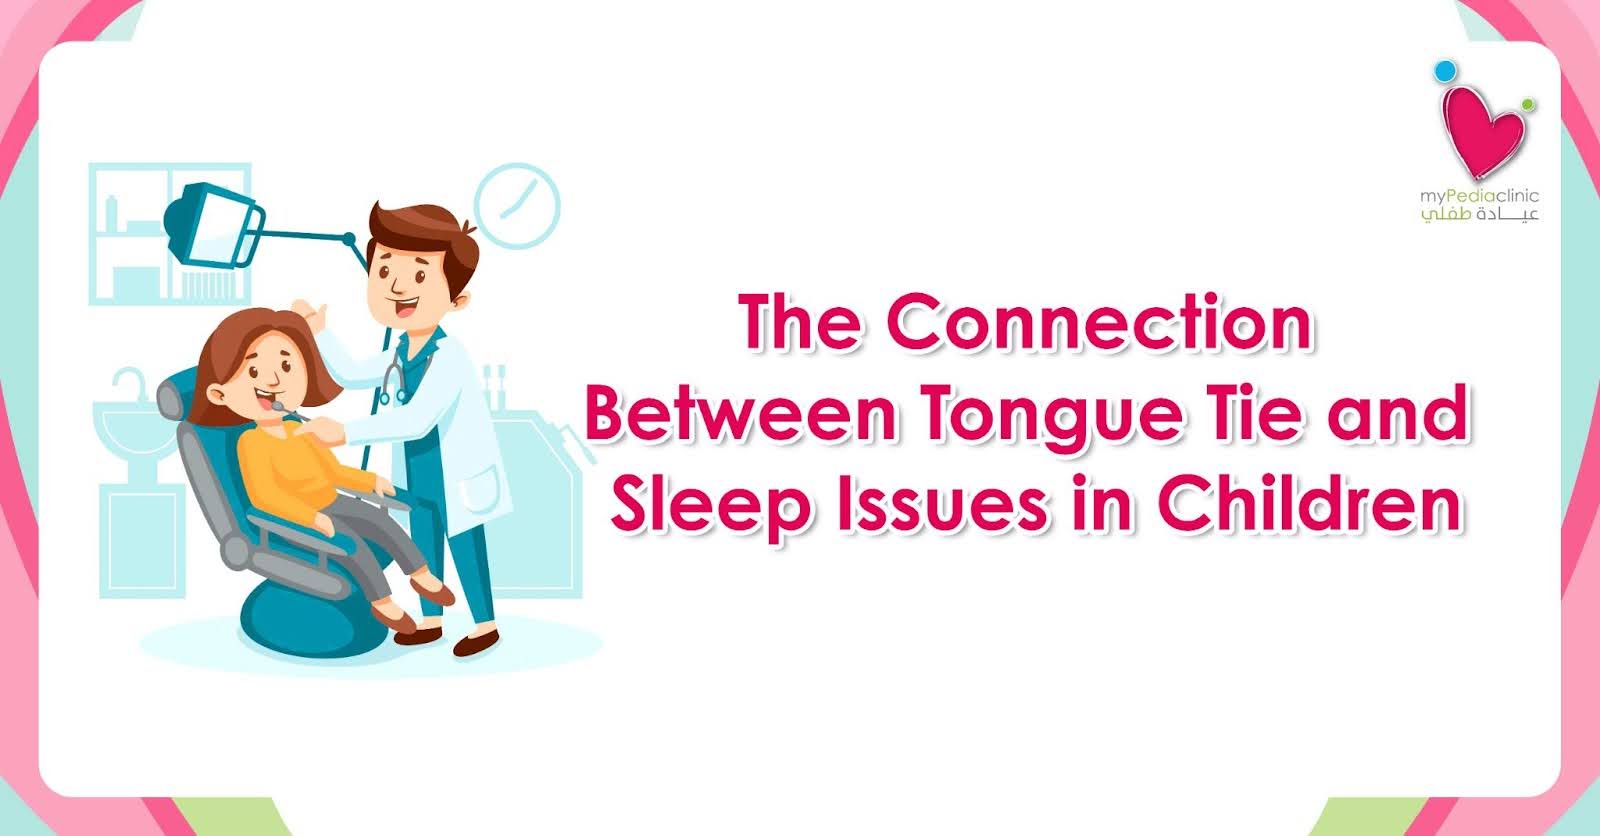 The Connection Between Tongue Tie and Sleep Issues in Children